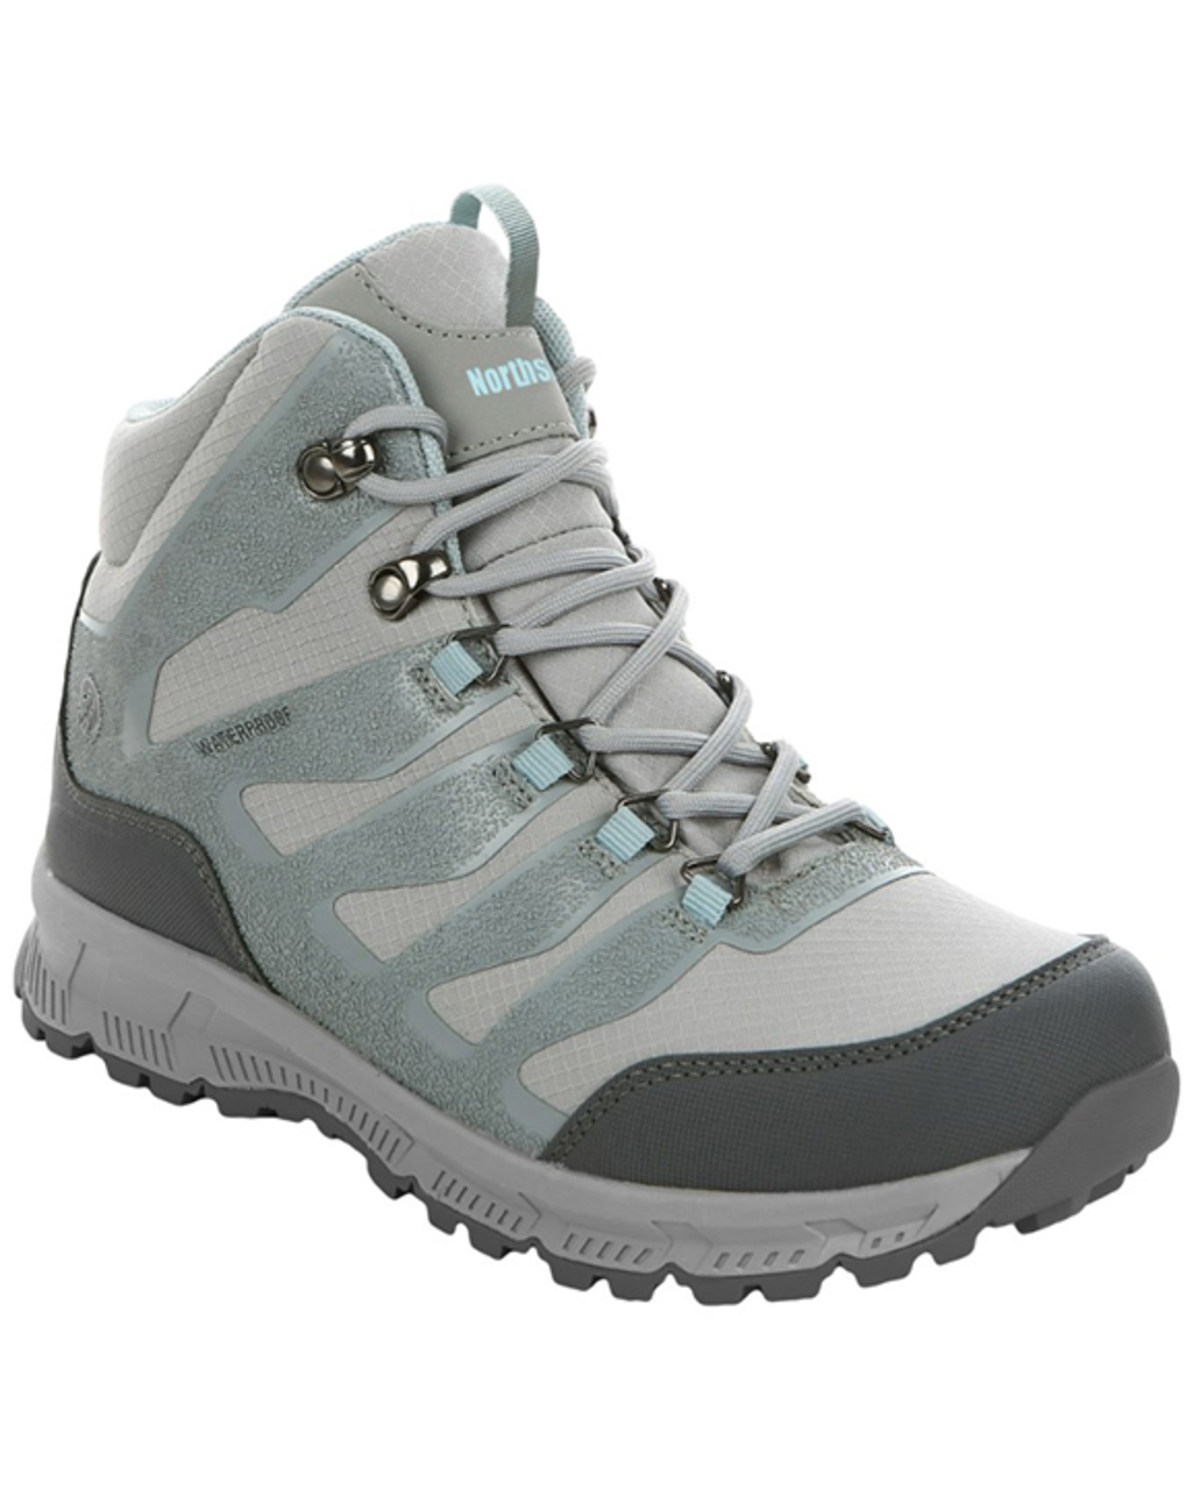 Northside Women's Mid Waterproof Lace-Up Hiking Work Boots